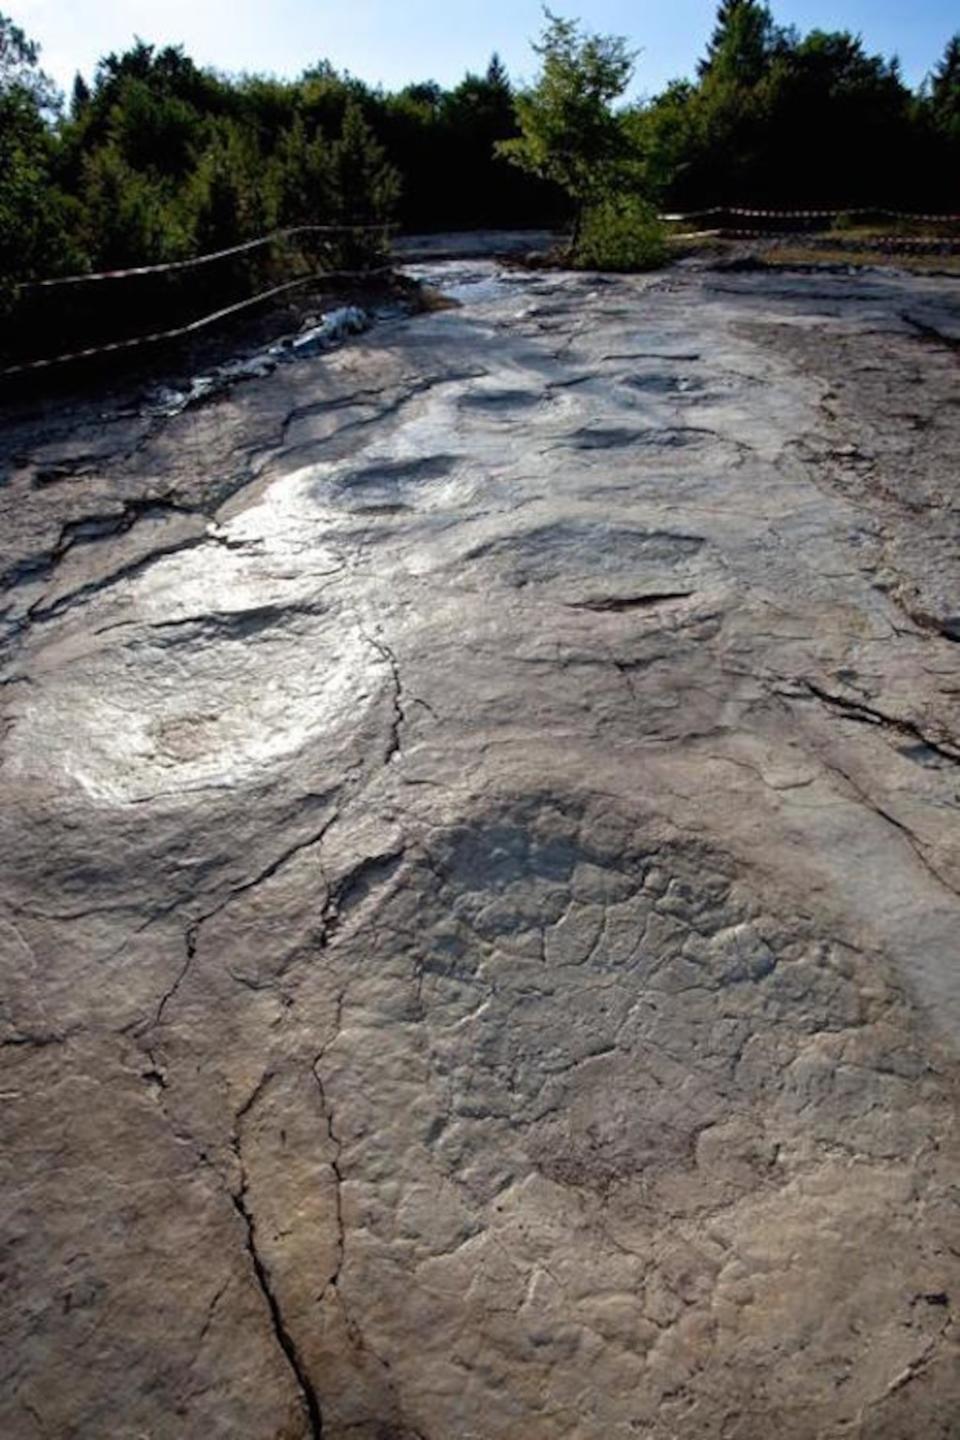 These newly discovered footprints and handprints make up the longest sauropod trackway on record. <cite>P. Dumas</cite>